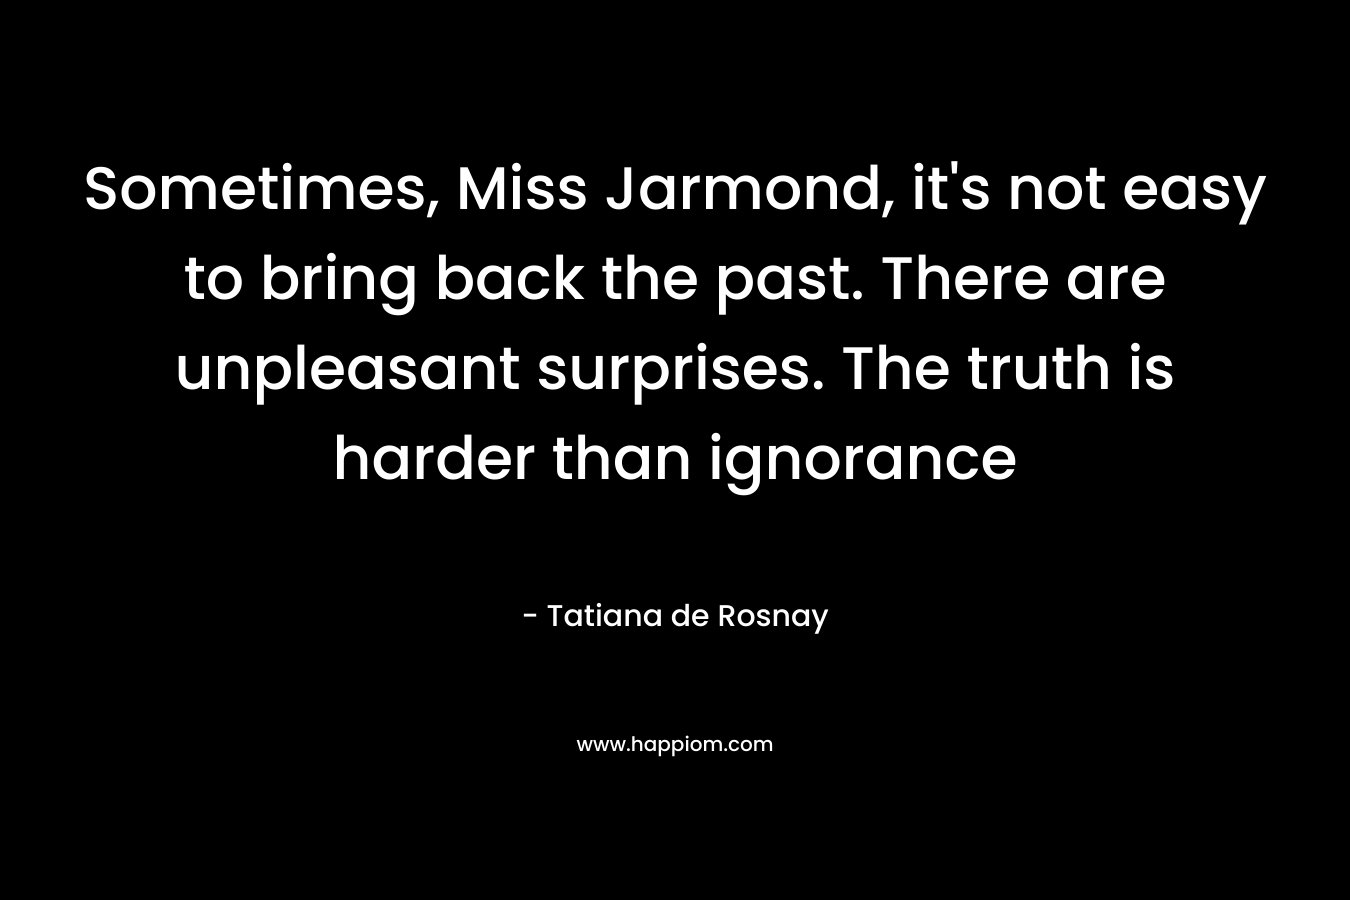 Sometimes, Miss Jarmond, it's not easy to bring back the past. There are unpleasant surprises. The truth is harder than ignorance